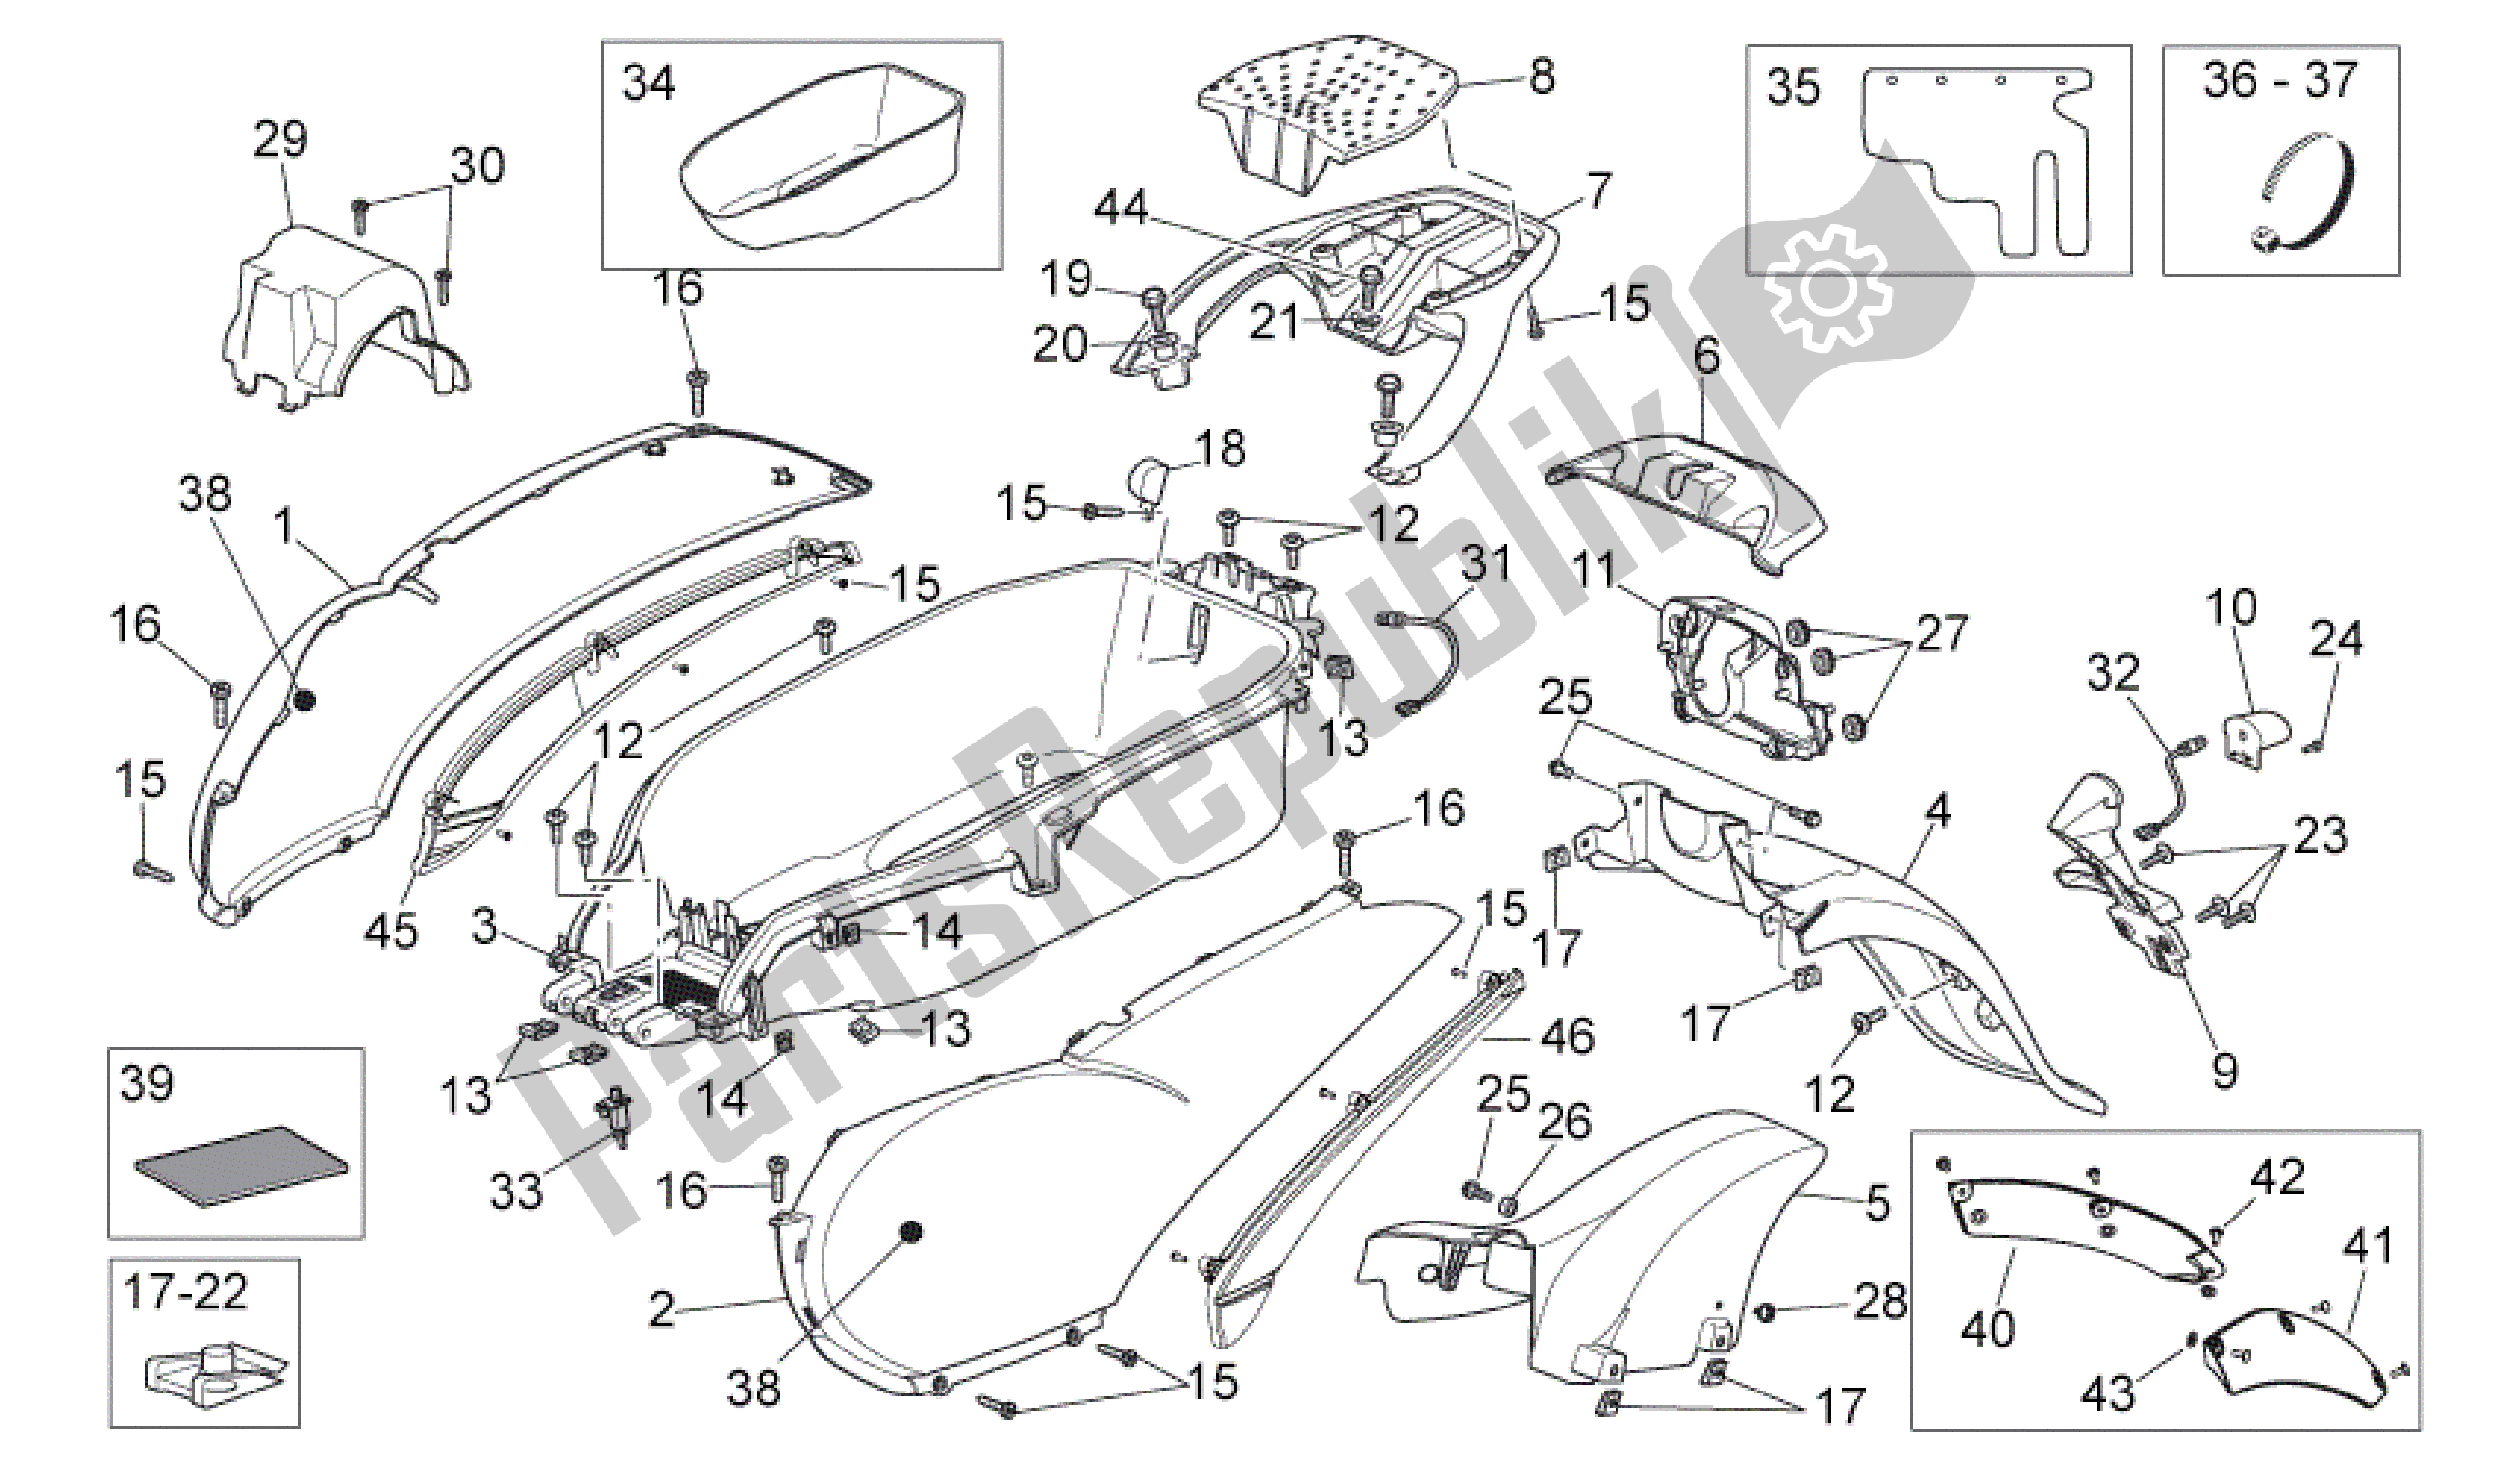 All parts for the Rear Body of the Aprilia Scarabeo 500 2006 - 2008